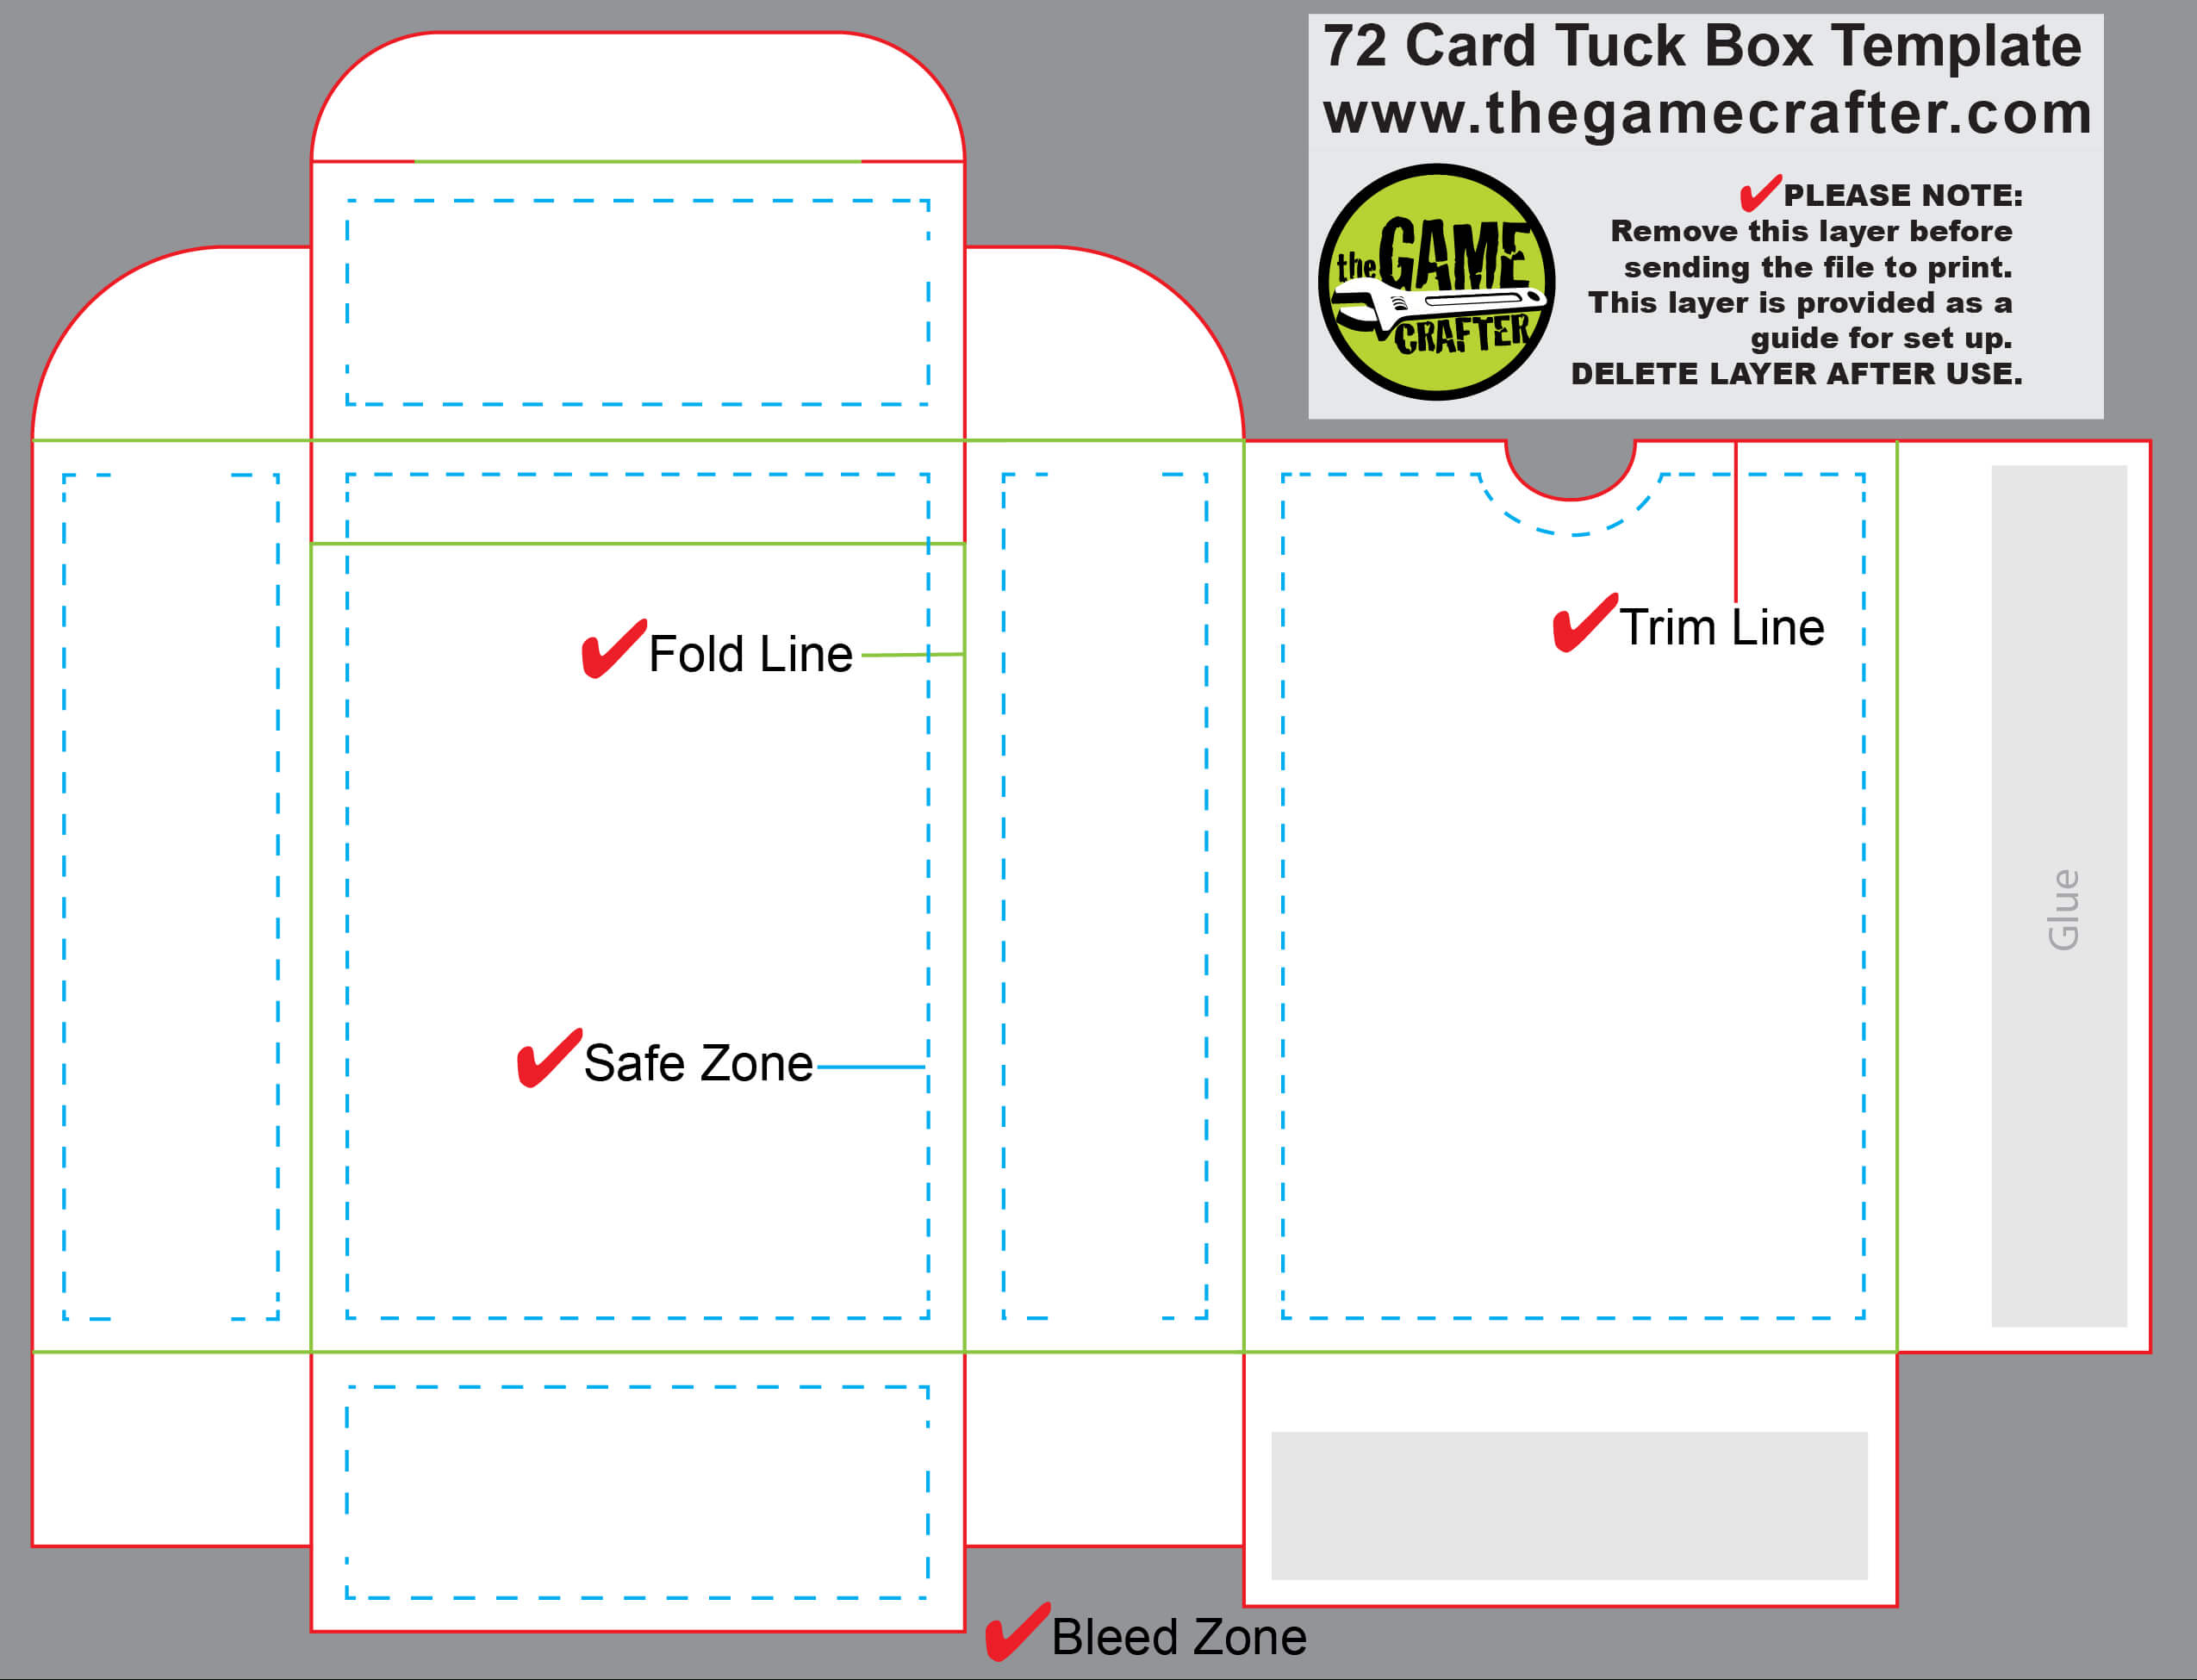 014 Card Tuck Box Playing Size Template Astounding Ideas For Custom Playing Card Template